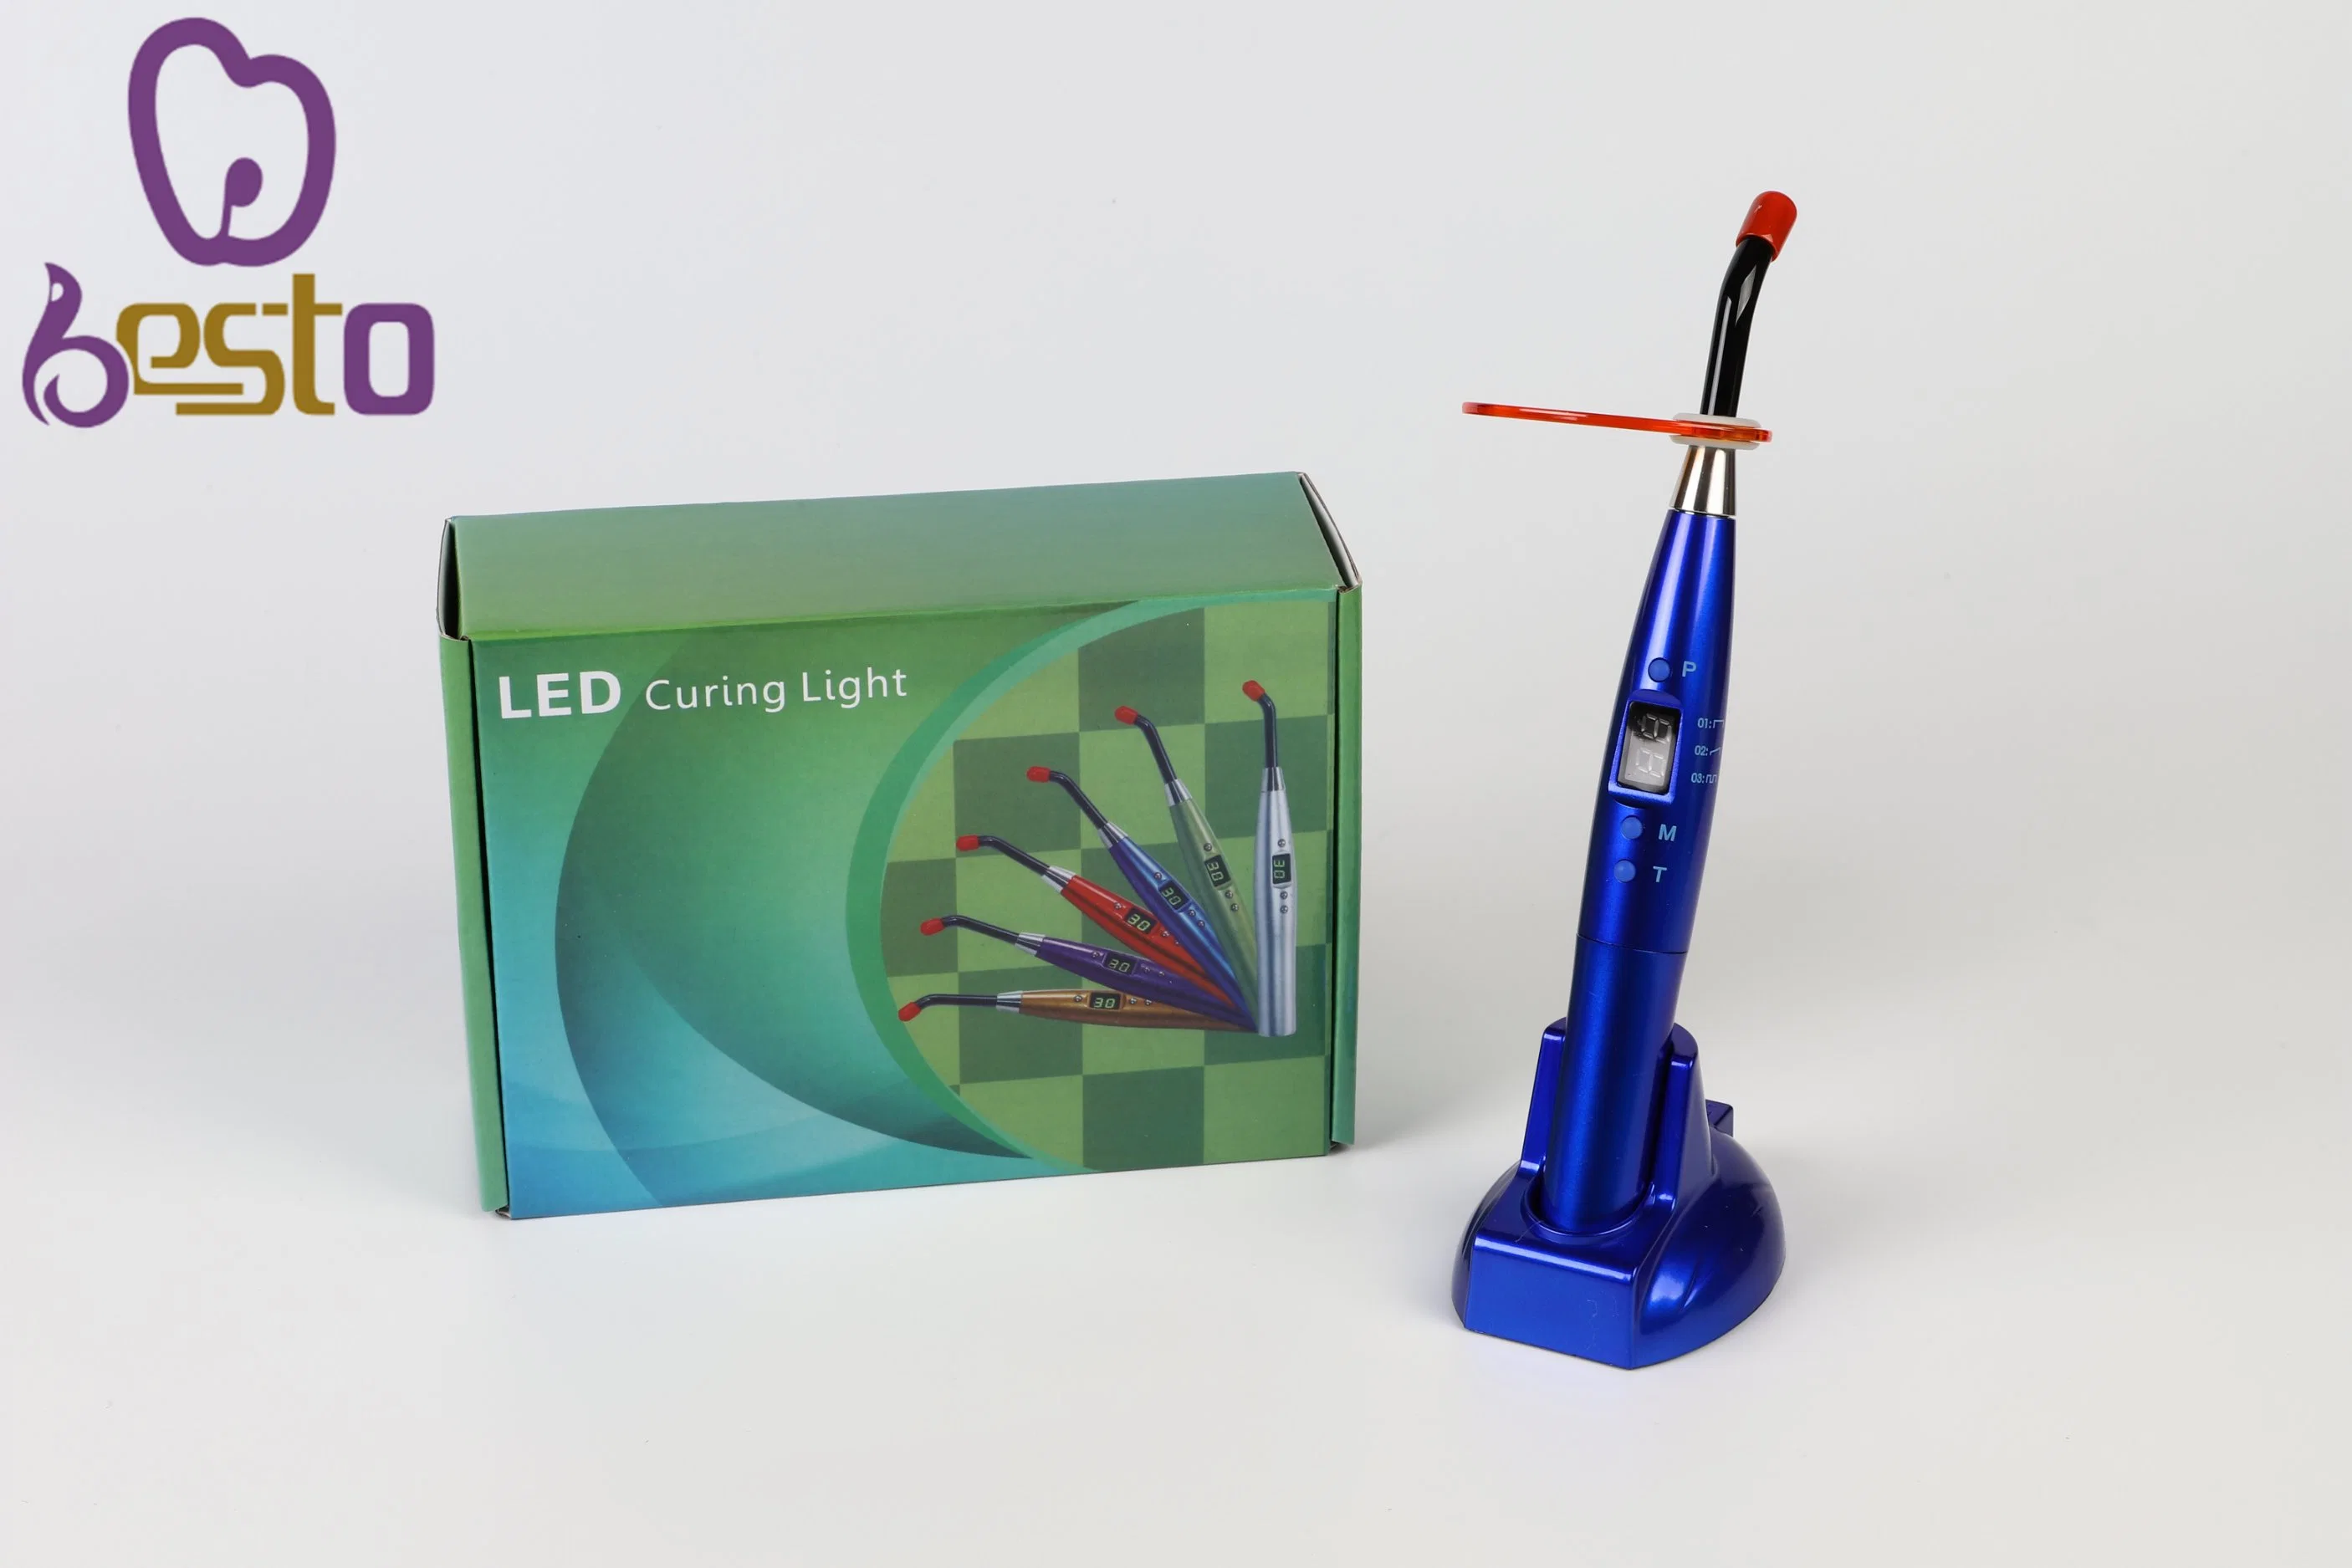 High Performance Colorful Portable Wireless LED Dental Curing Light with High Power